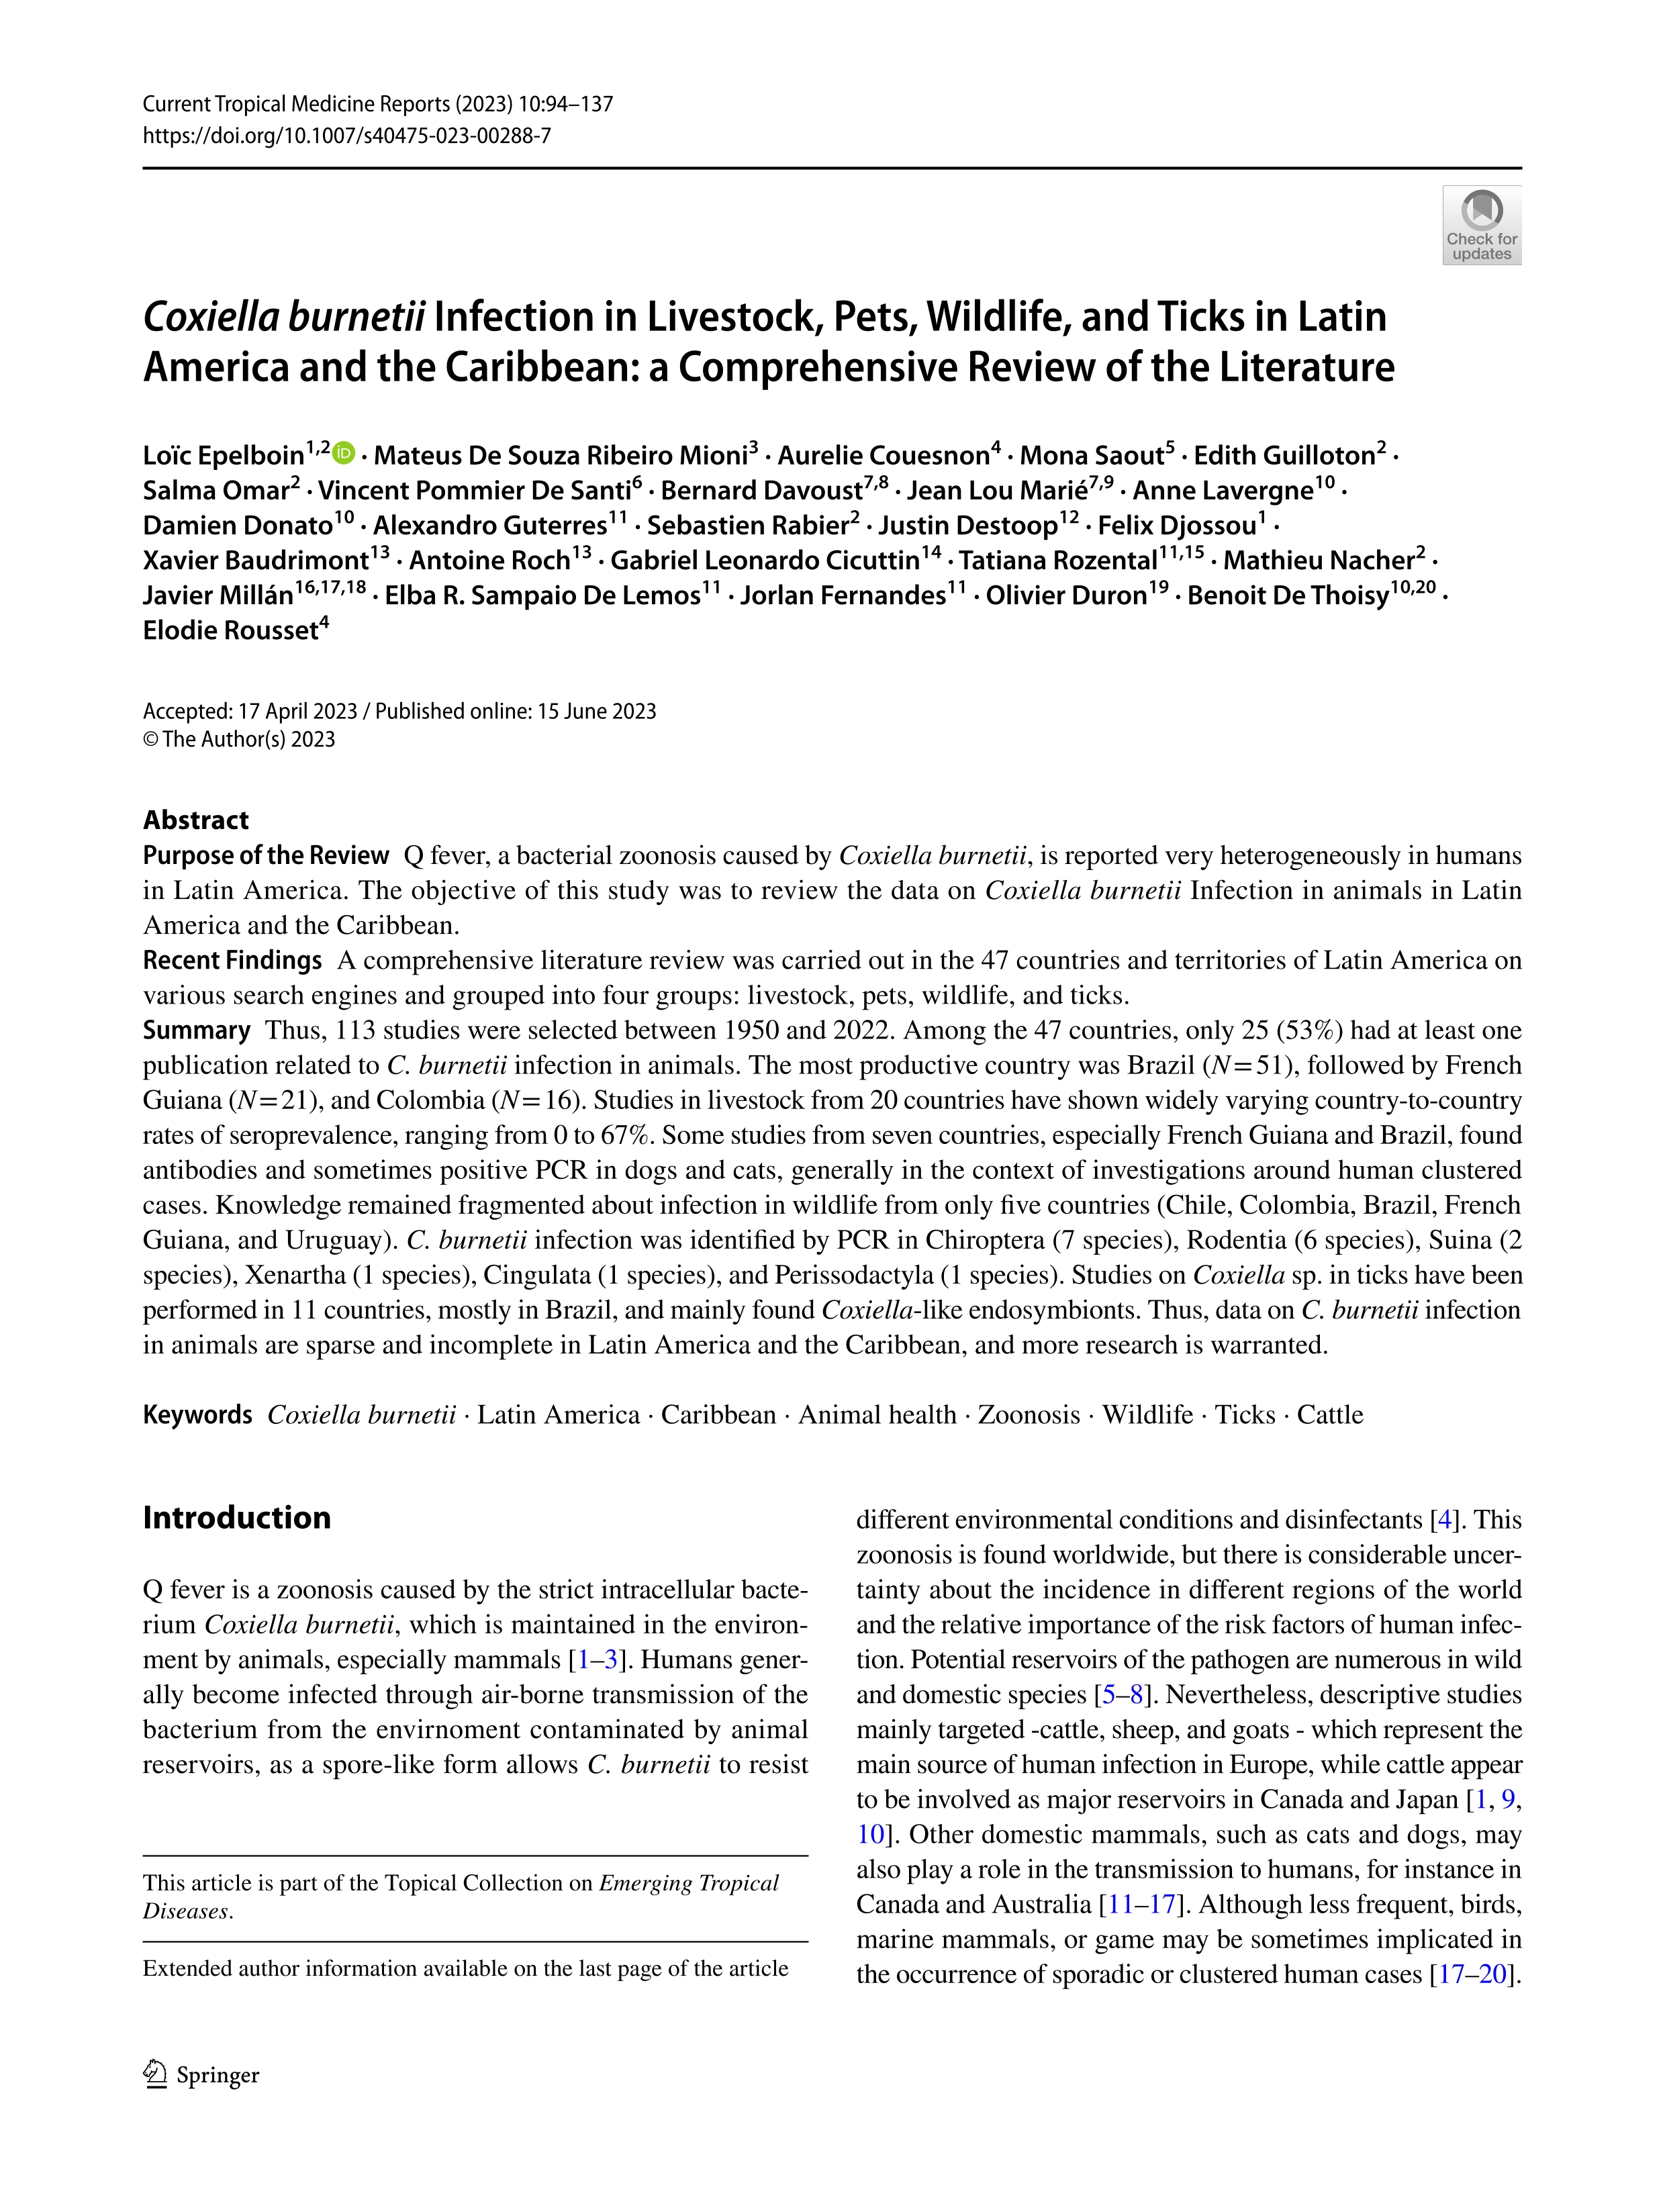 Coxiella burnetii Infection in Livestock, Pets, Wildlife, and Ticks in Latin America and the Caribbean: a Comprehensive Review of the Literature